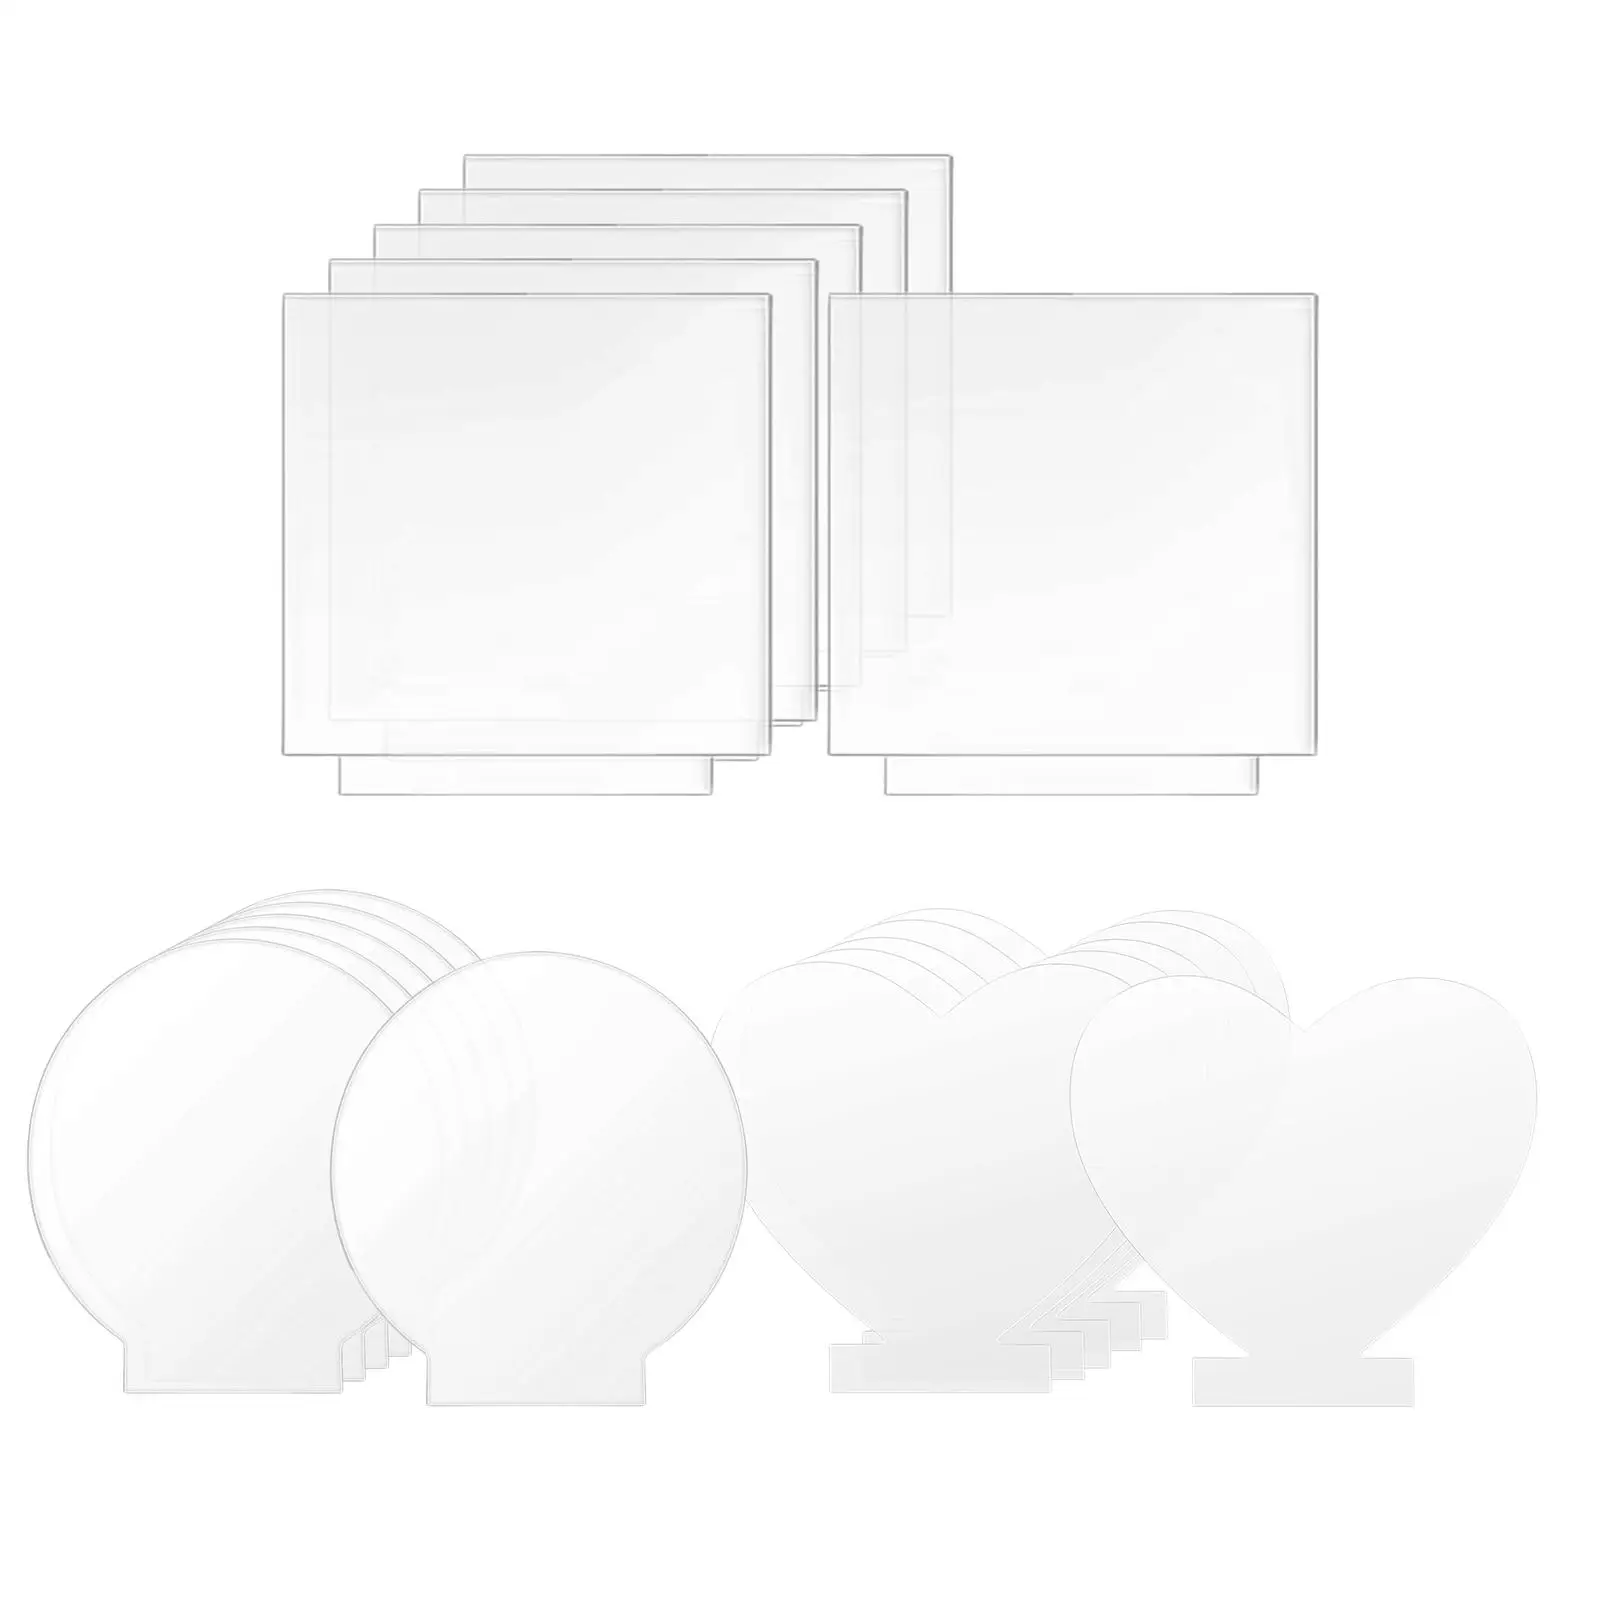 6x Acrylic Sheets for Light Base   Panel for Signs Craft Supplies